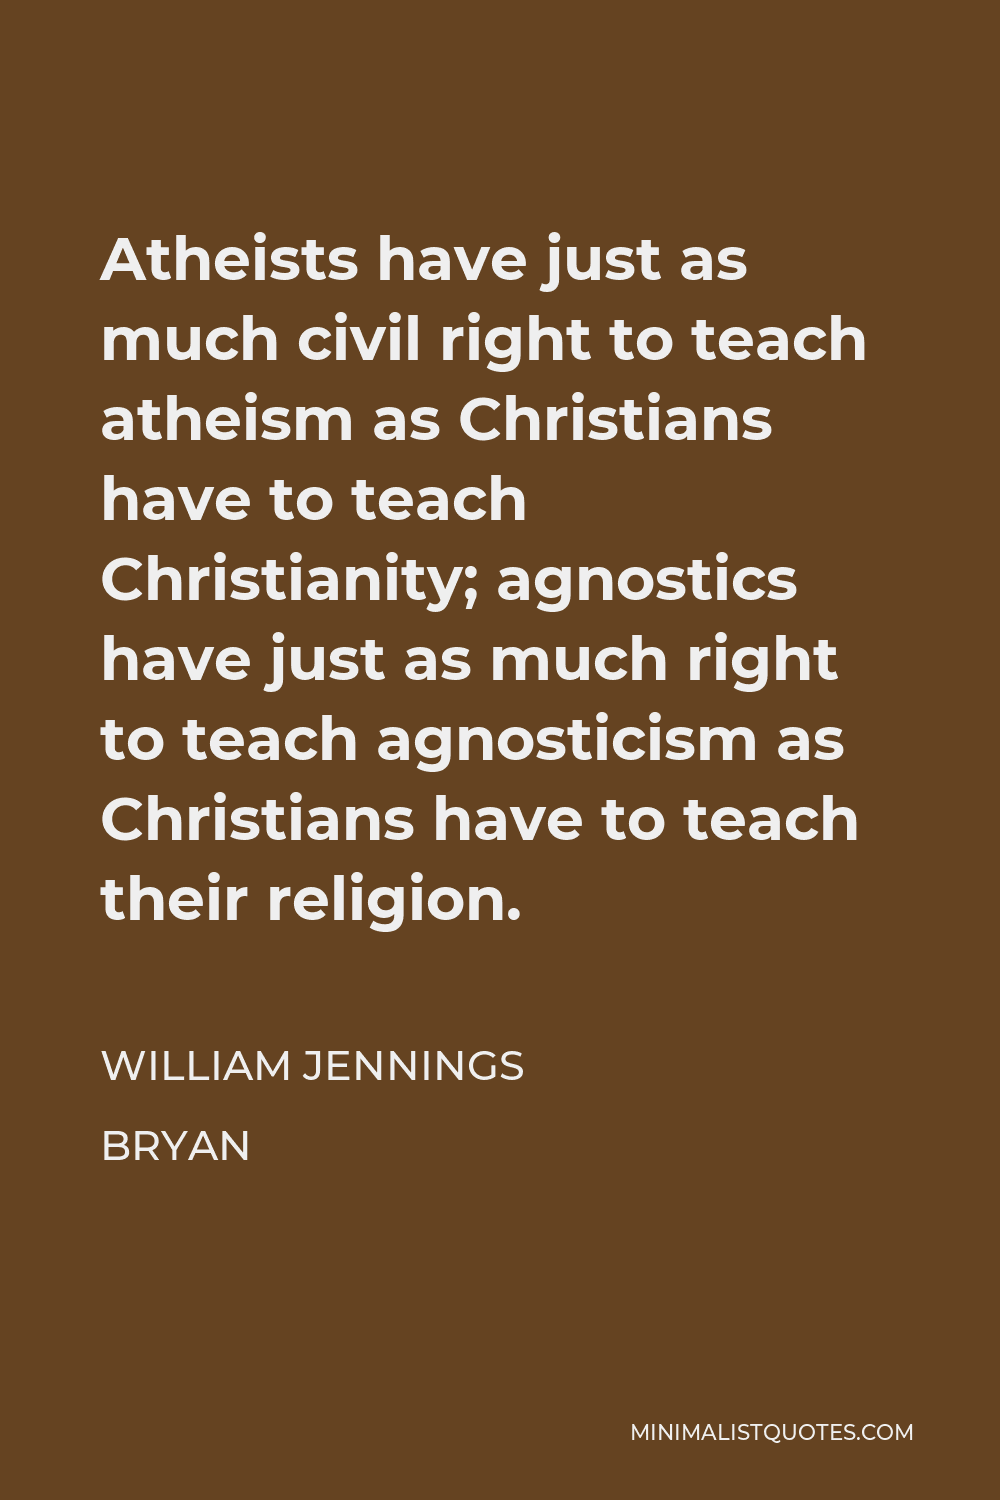 William Jennings Bryan Quote - Atheists have just as much civil right to teach atheism as Christians have to teach Christianity; agnostics have just as much right to teach agnosticism as Christians have to teach their religion.